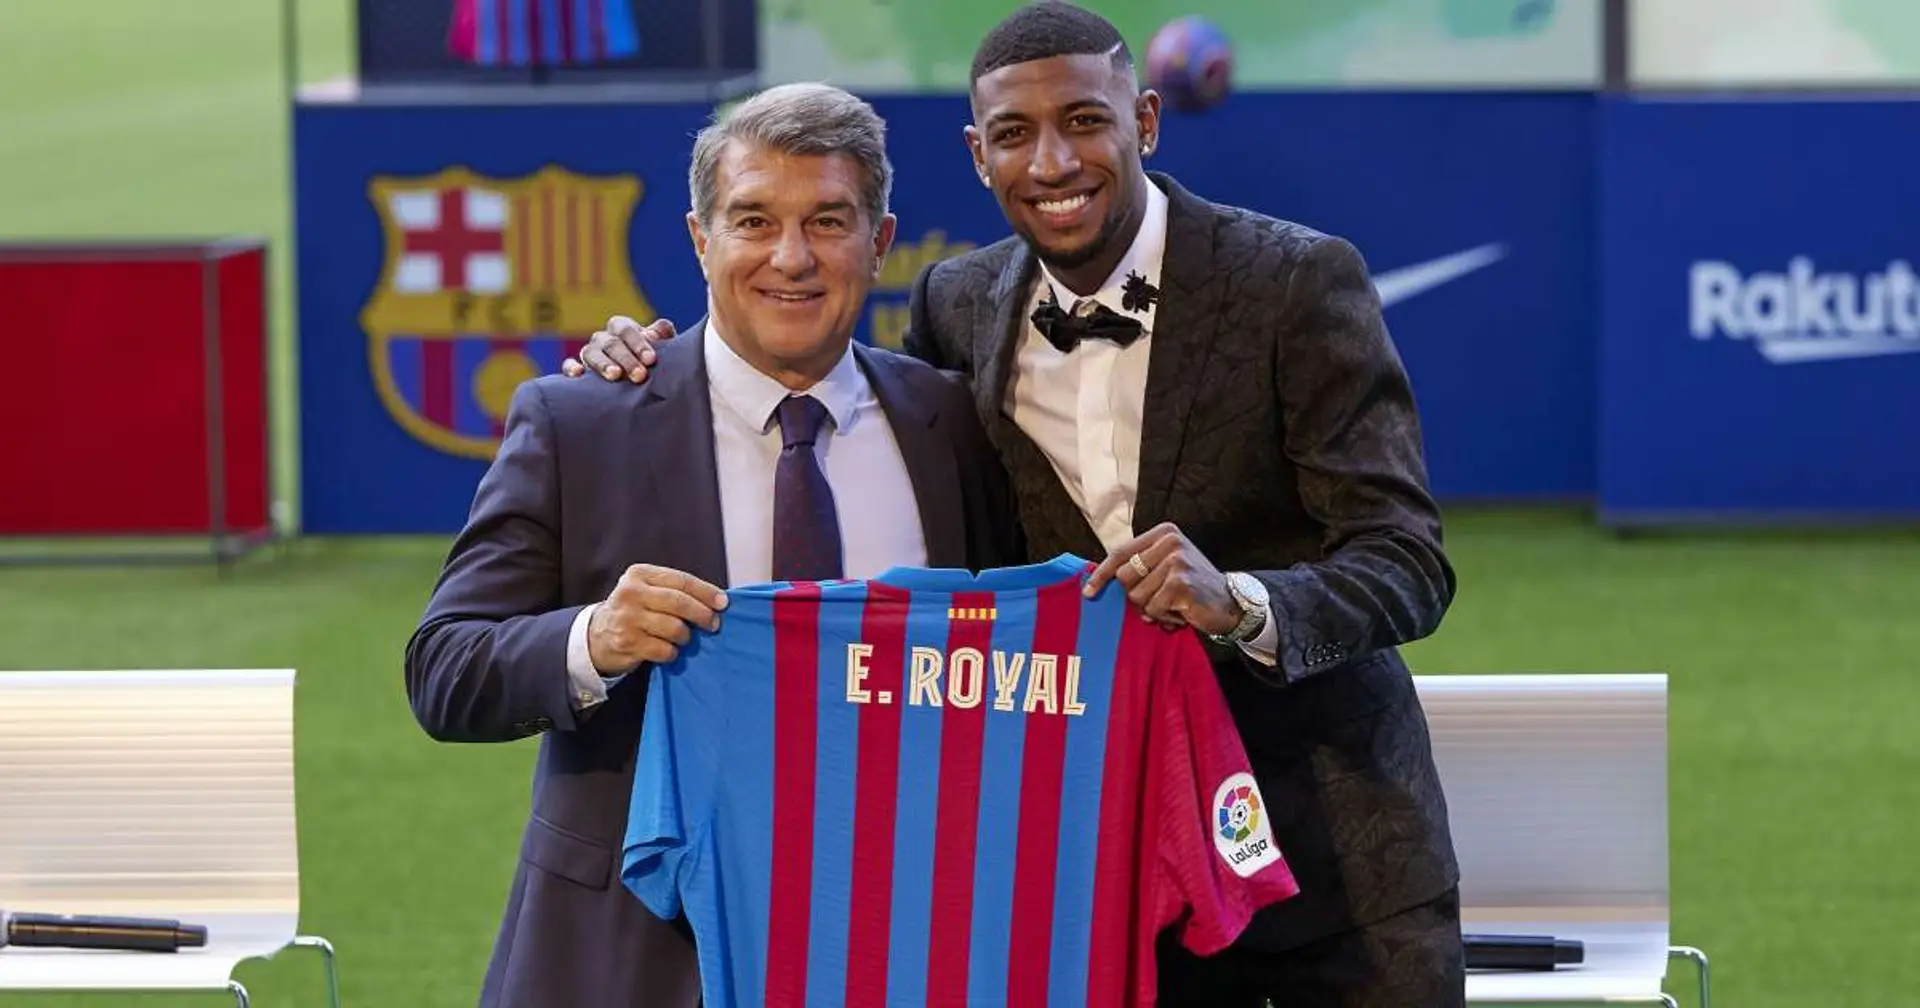 'When they signed me, they thought of selling me': Emerson hits out at Barcelona